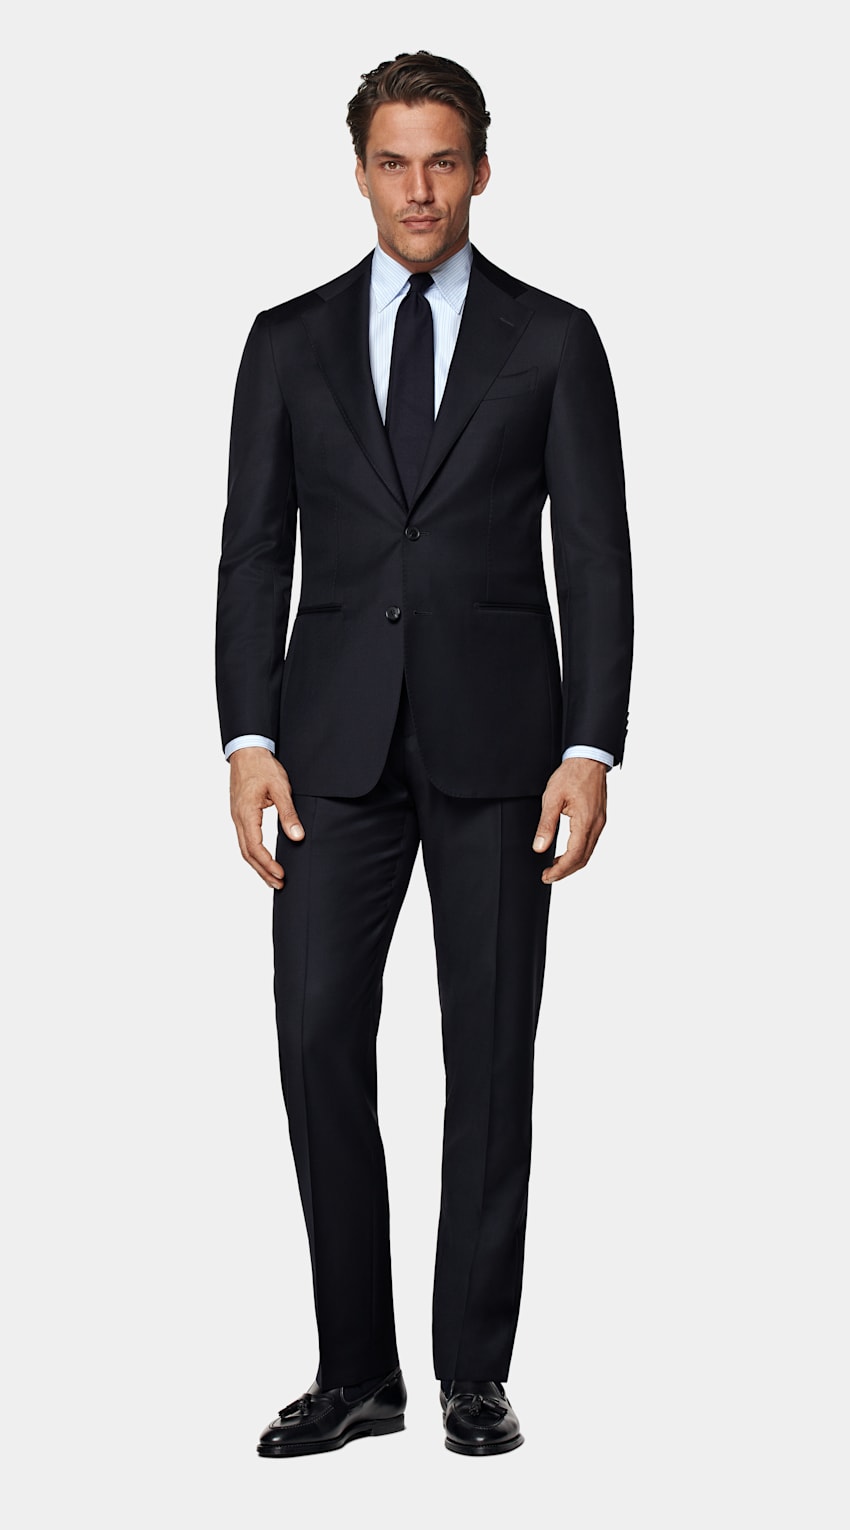 SUITSUPPLY Pure S130' Wool by Vitale Barberis Canonico, Italy Dark Blue Custom Made Suit